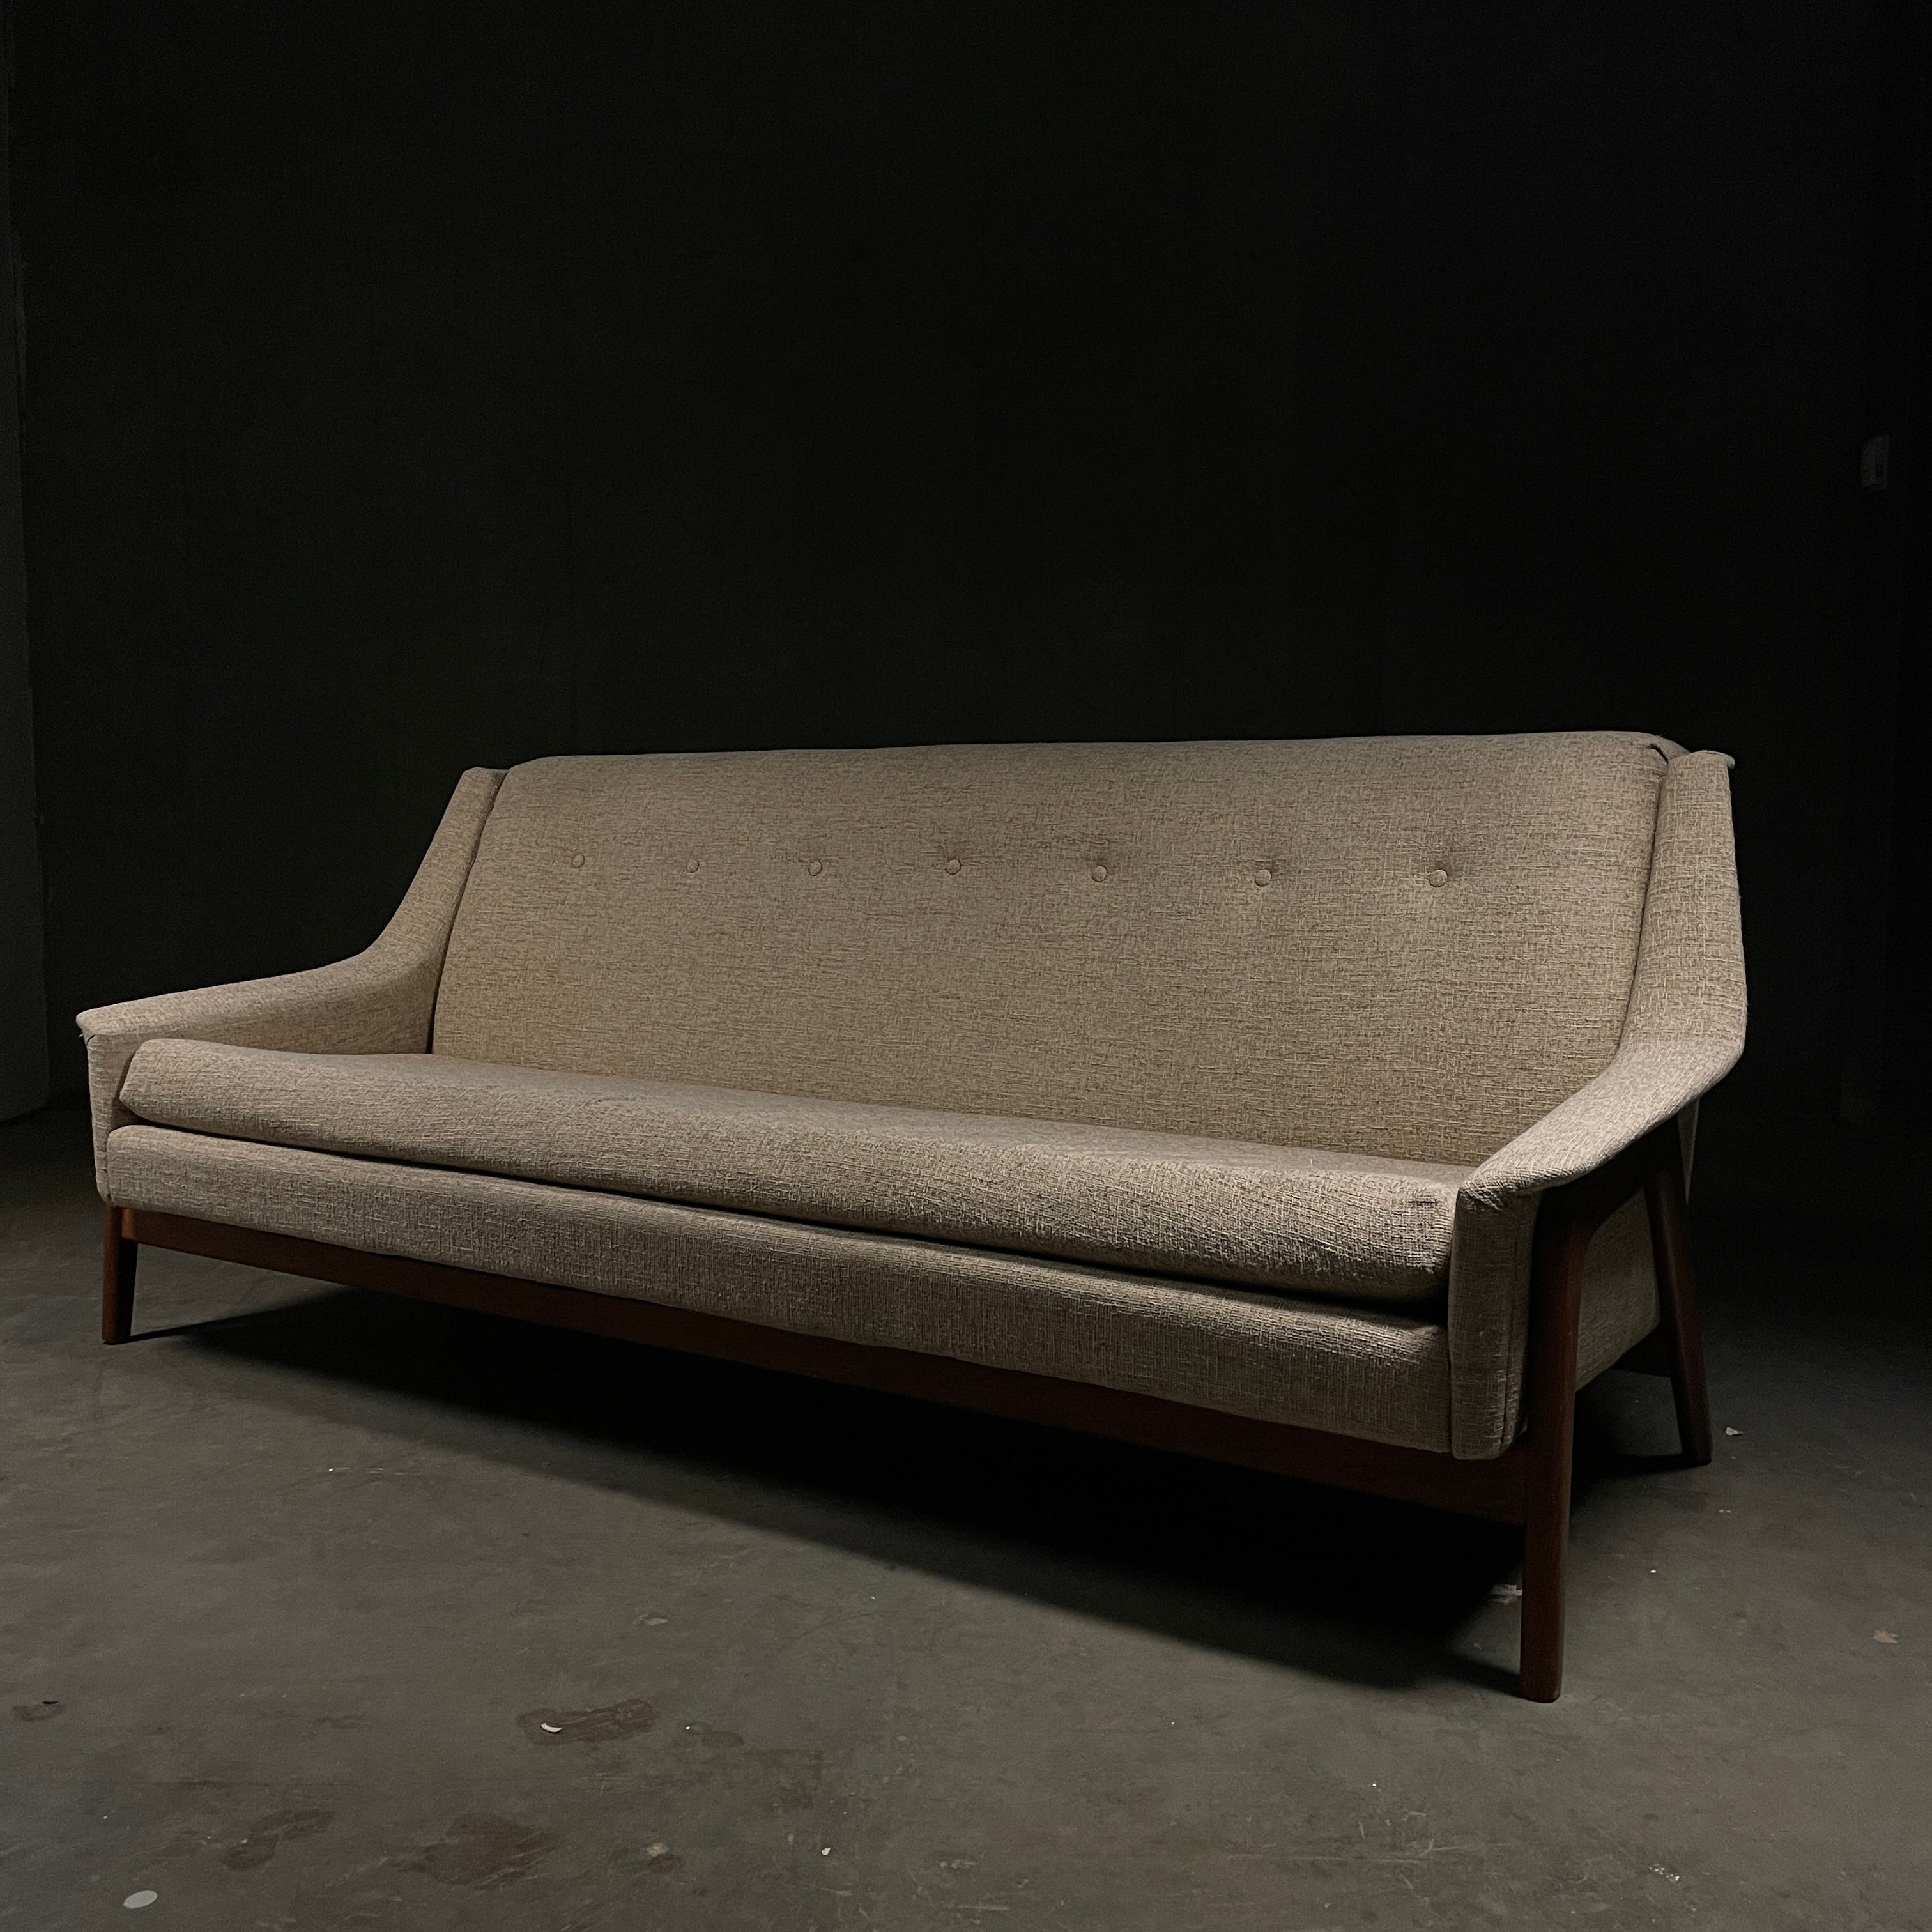 Vintage Mid-Century Modern Sofa Lounge Chair by Folke Ohlsson for DUX